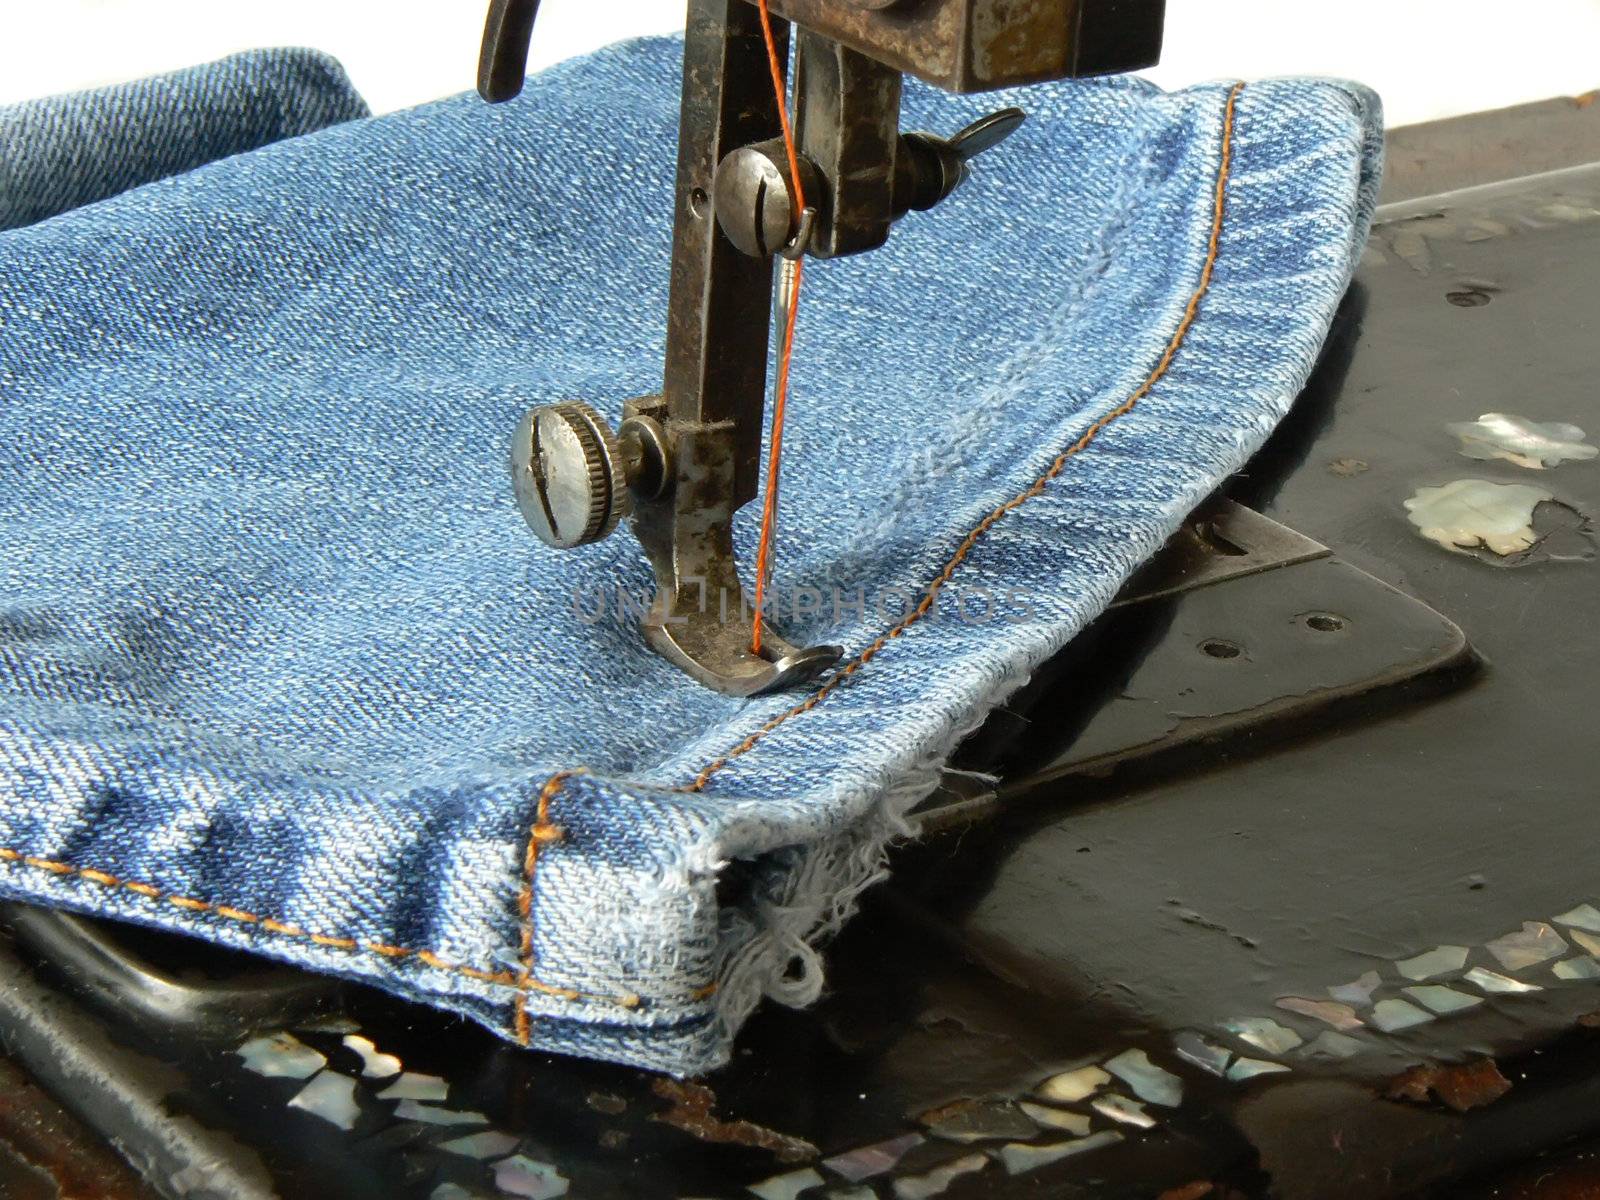 clousup of old sewing machine and jeans